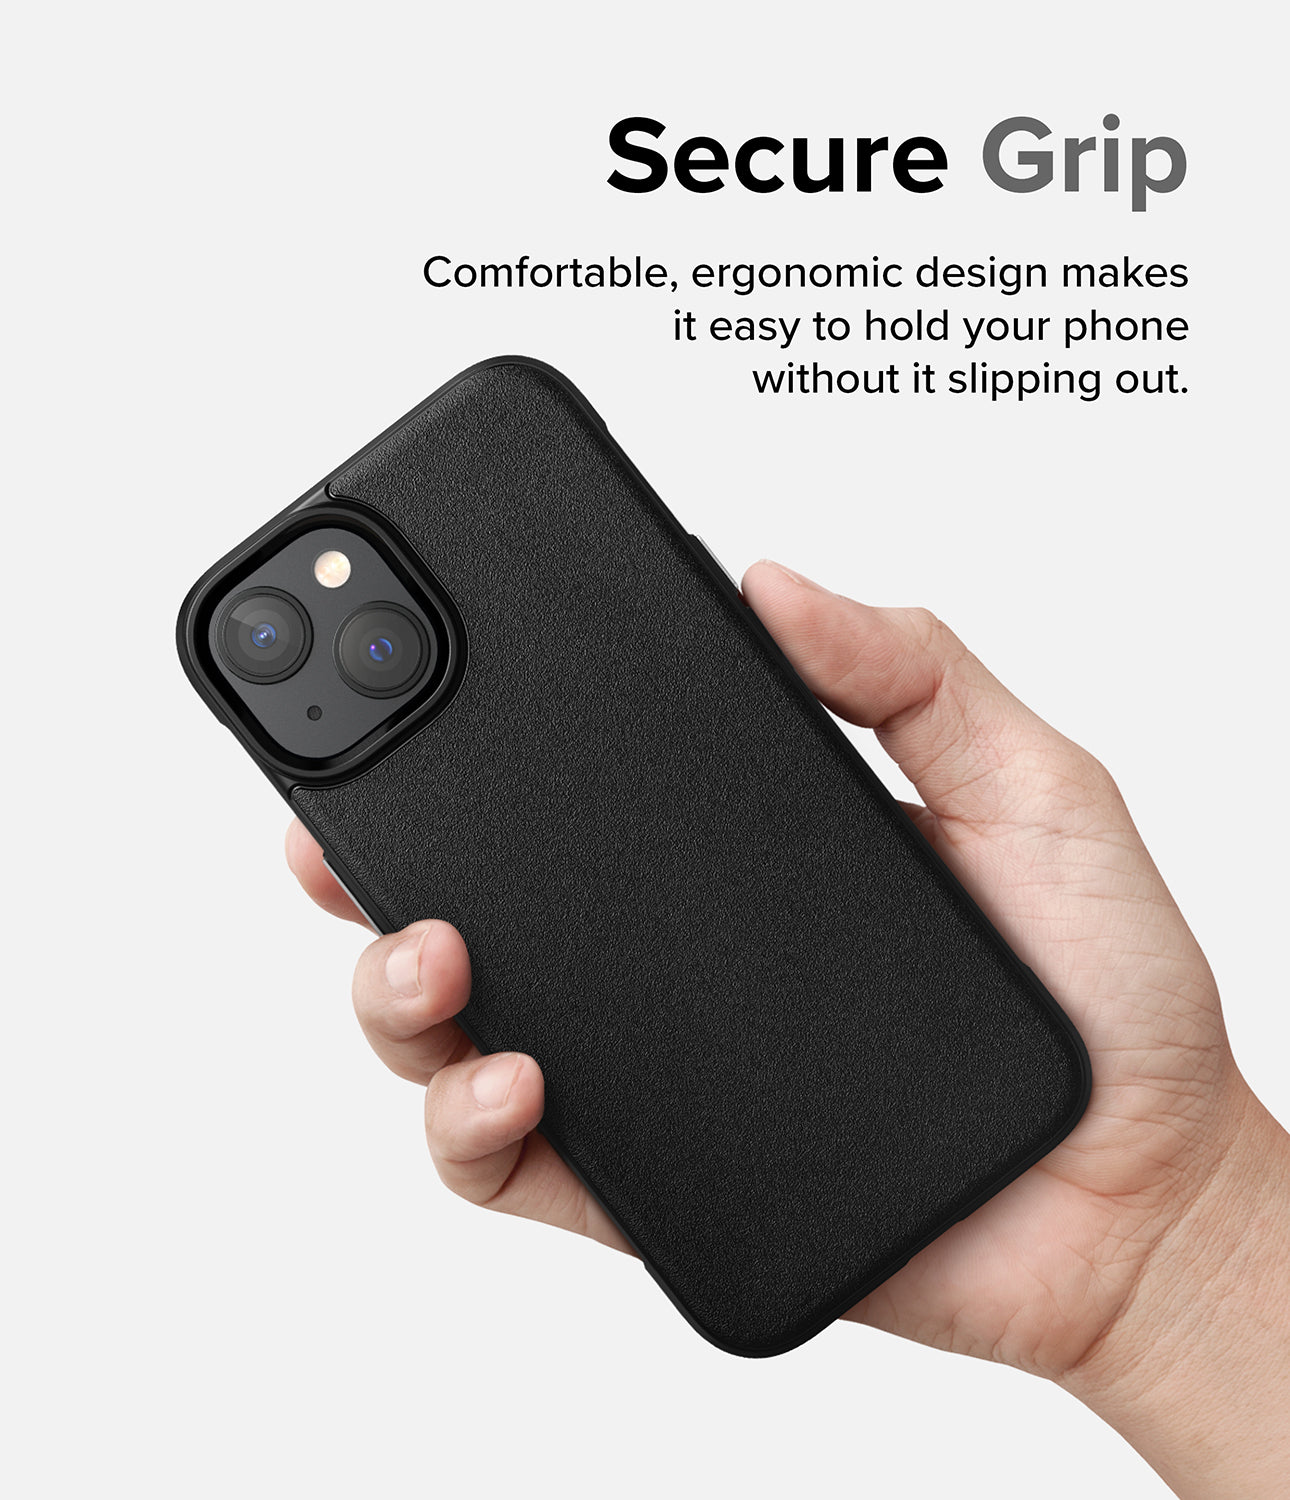 iPhone 14 Case | Onyx - Black - Secure Grip. Comfortable, ergonomic design makes it easy to hold your phone without it slipping out.